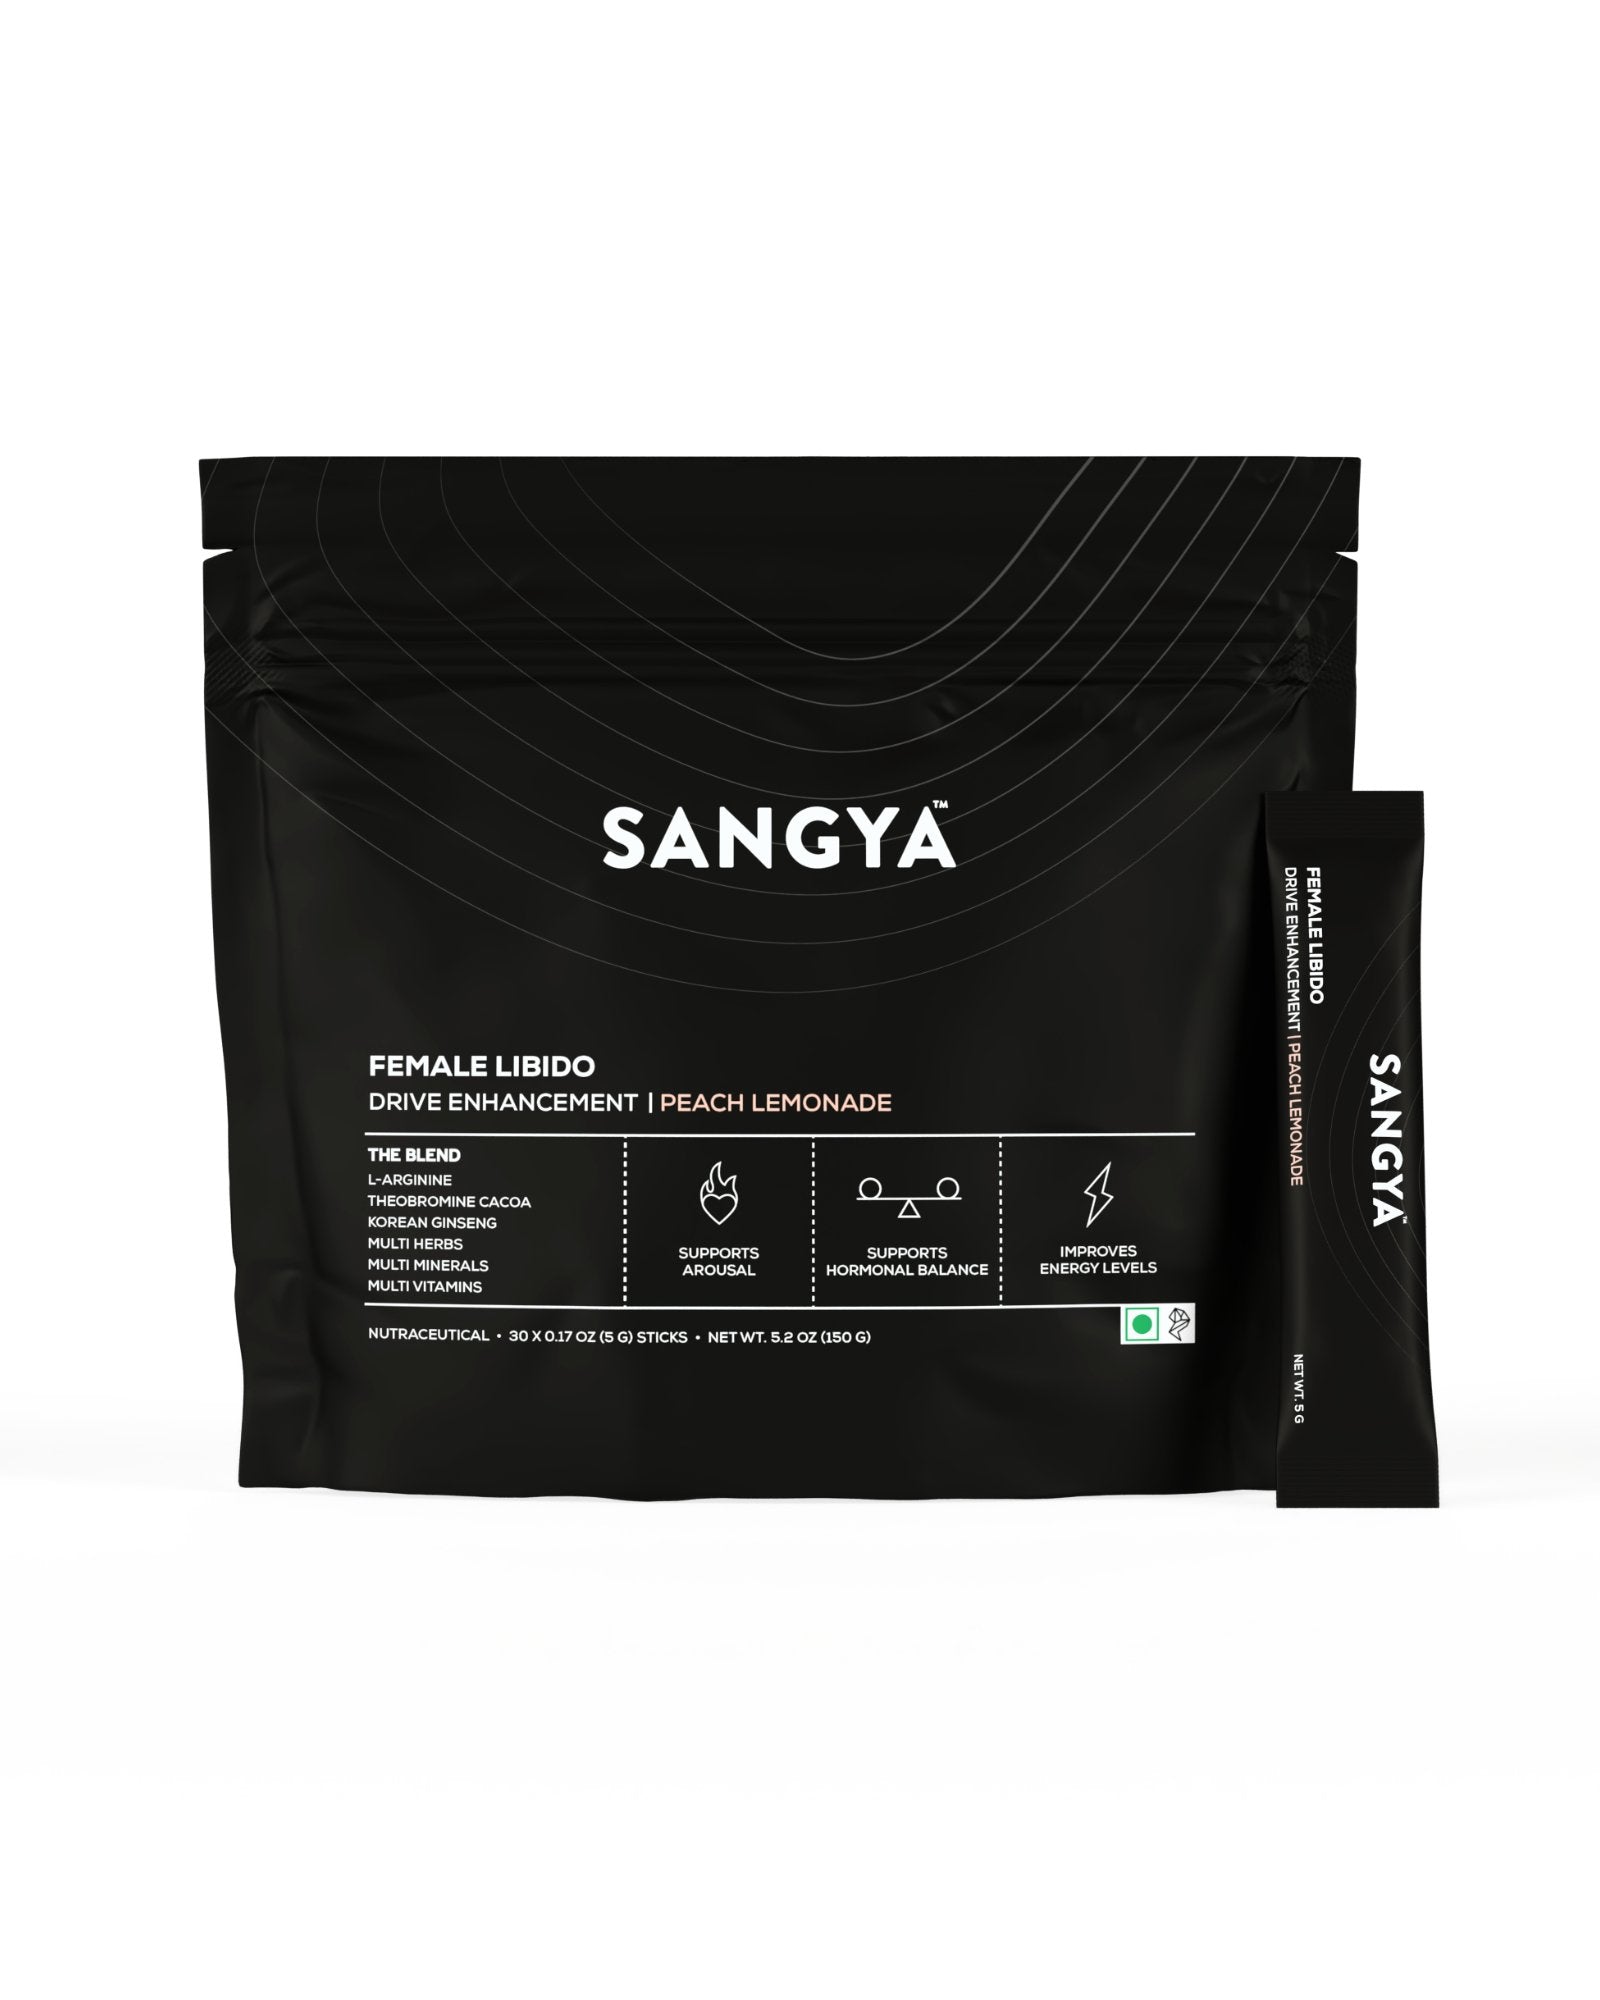 Sangya: Elevate Your Intimate Experience